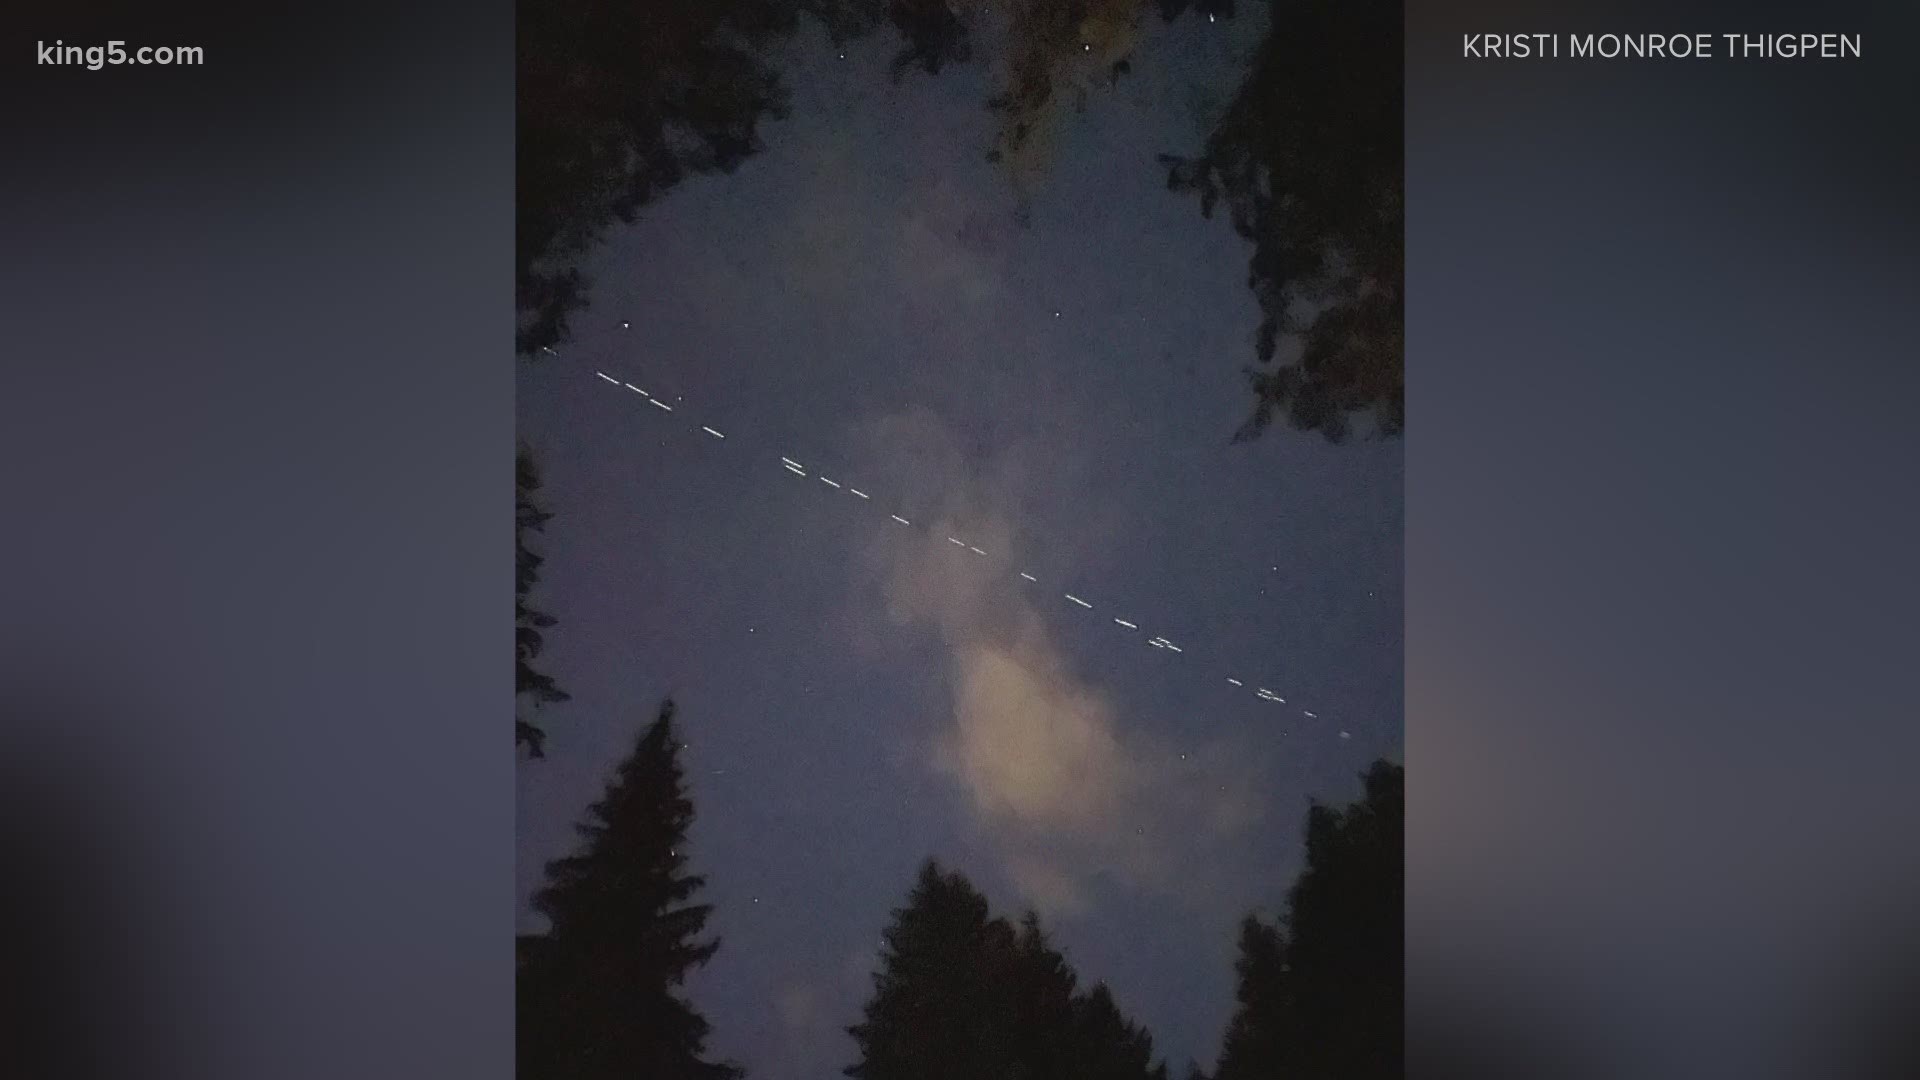 SpaceX launched 60 satellites last week as part of its Starlink program. Those satellites are now visible over western Washington.